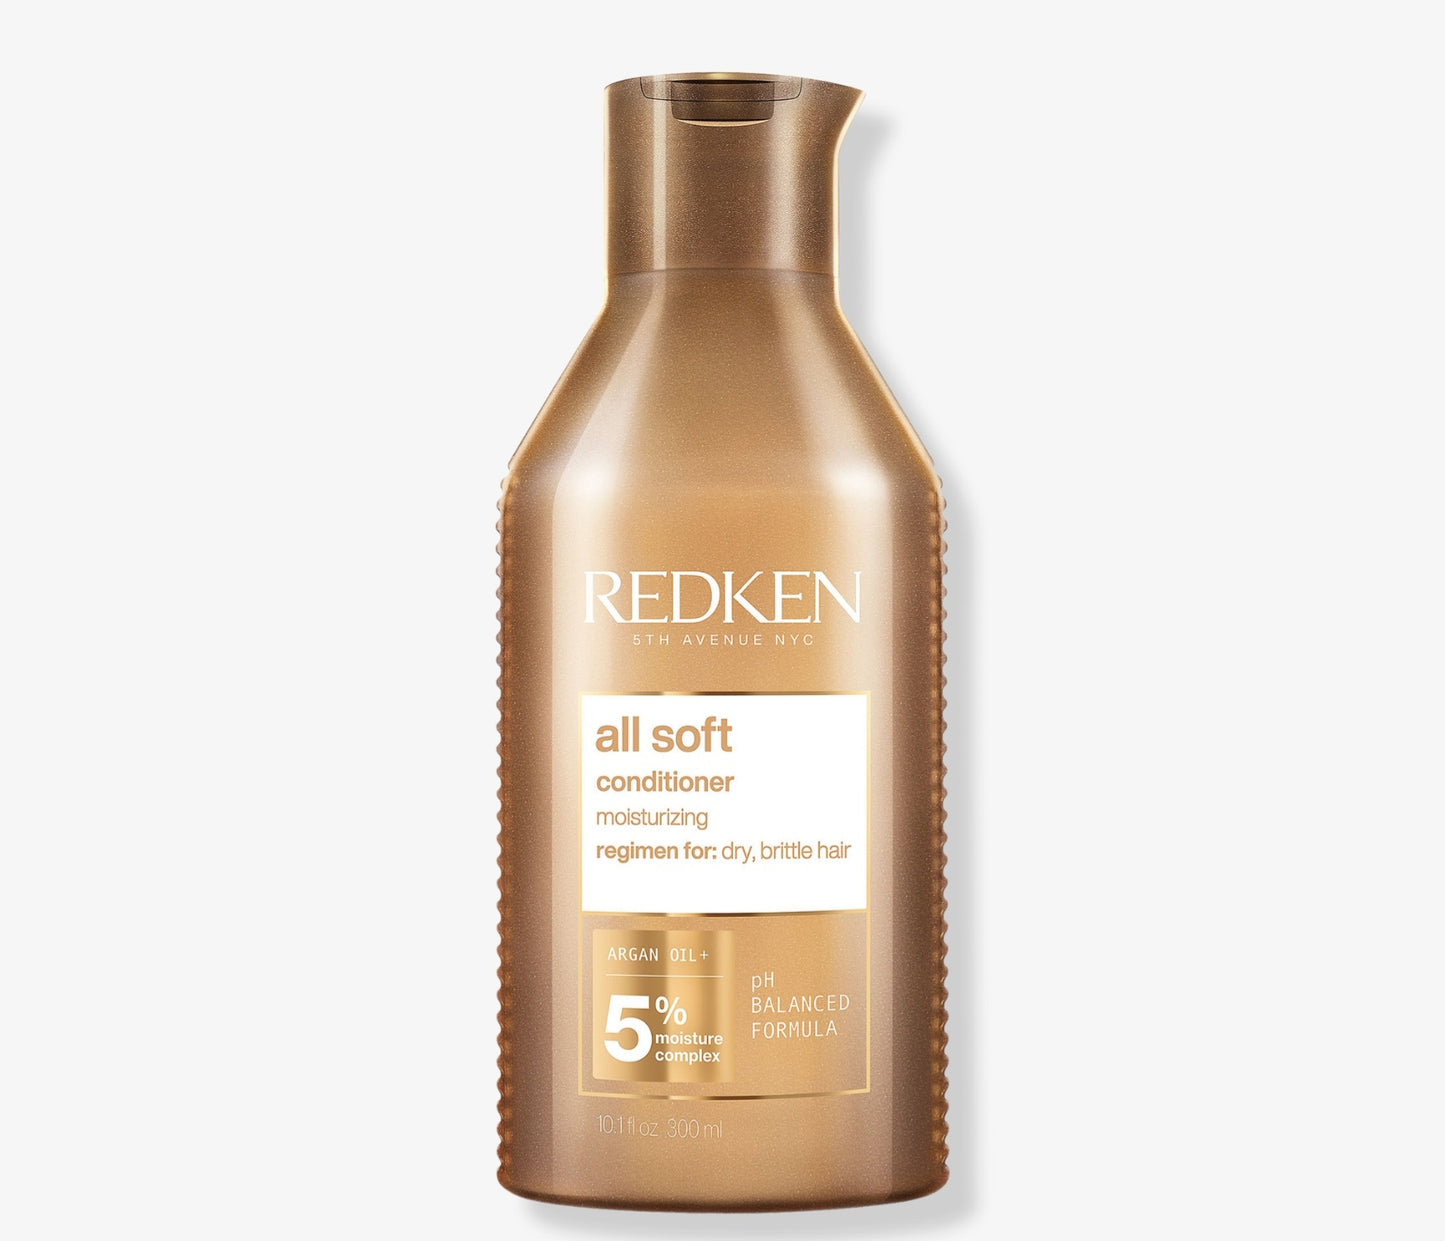 Redken All Soft Conditioner with Argan Oil